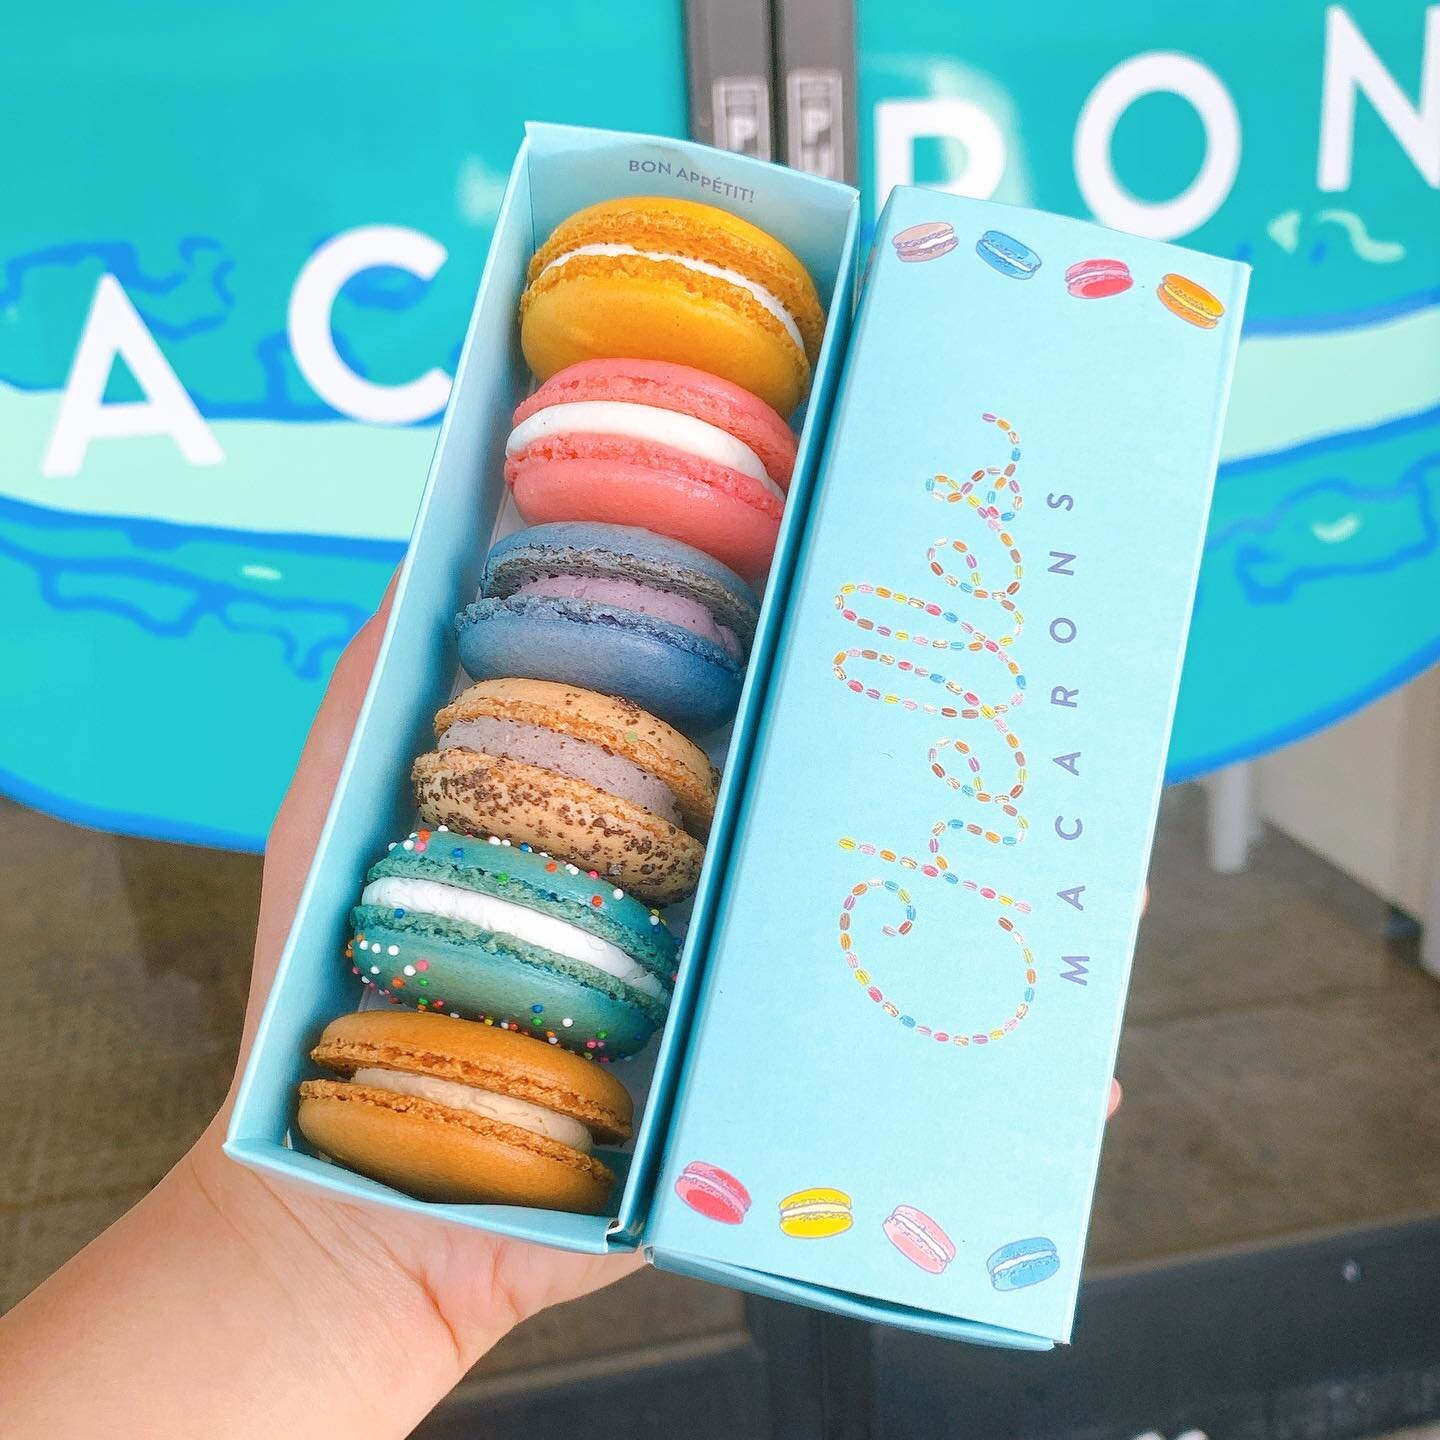 The simple happiness! Grab a box to-go and share the happiness! 🤩 

#ChellesMacarons #macaron #frenchmacarons #bakery #baking #foodie #sweettooth #cookies #dallasfoodie #instafood #instagood #dessert #macaronlove #patisserie #macaronstagram #foodpic